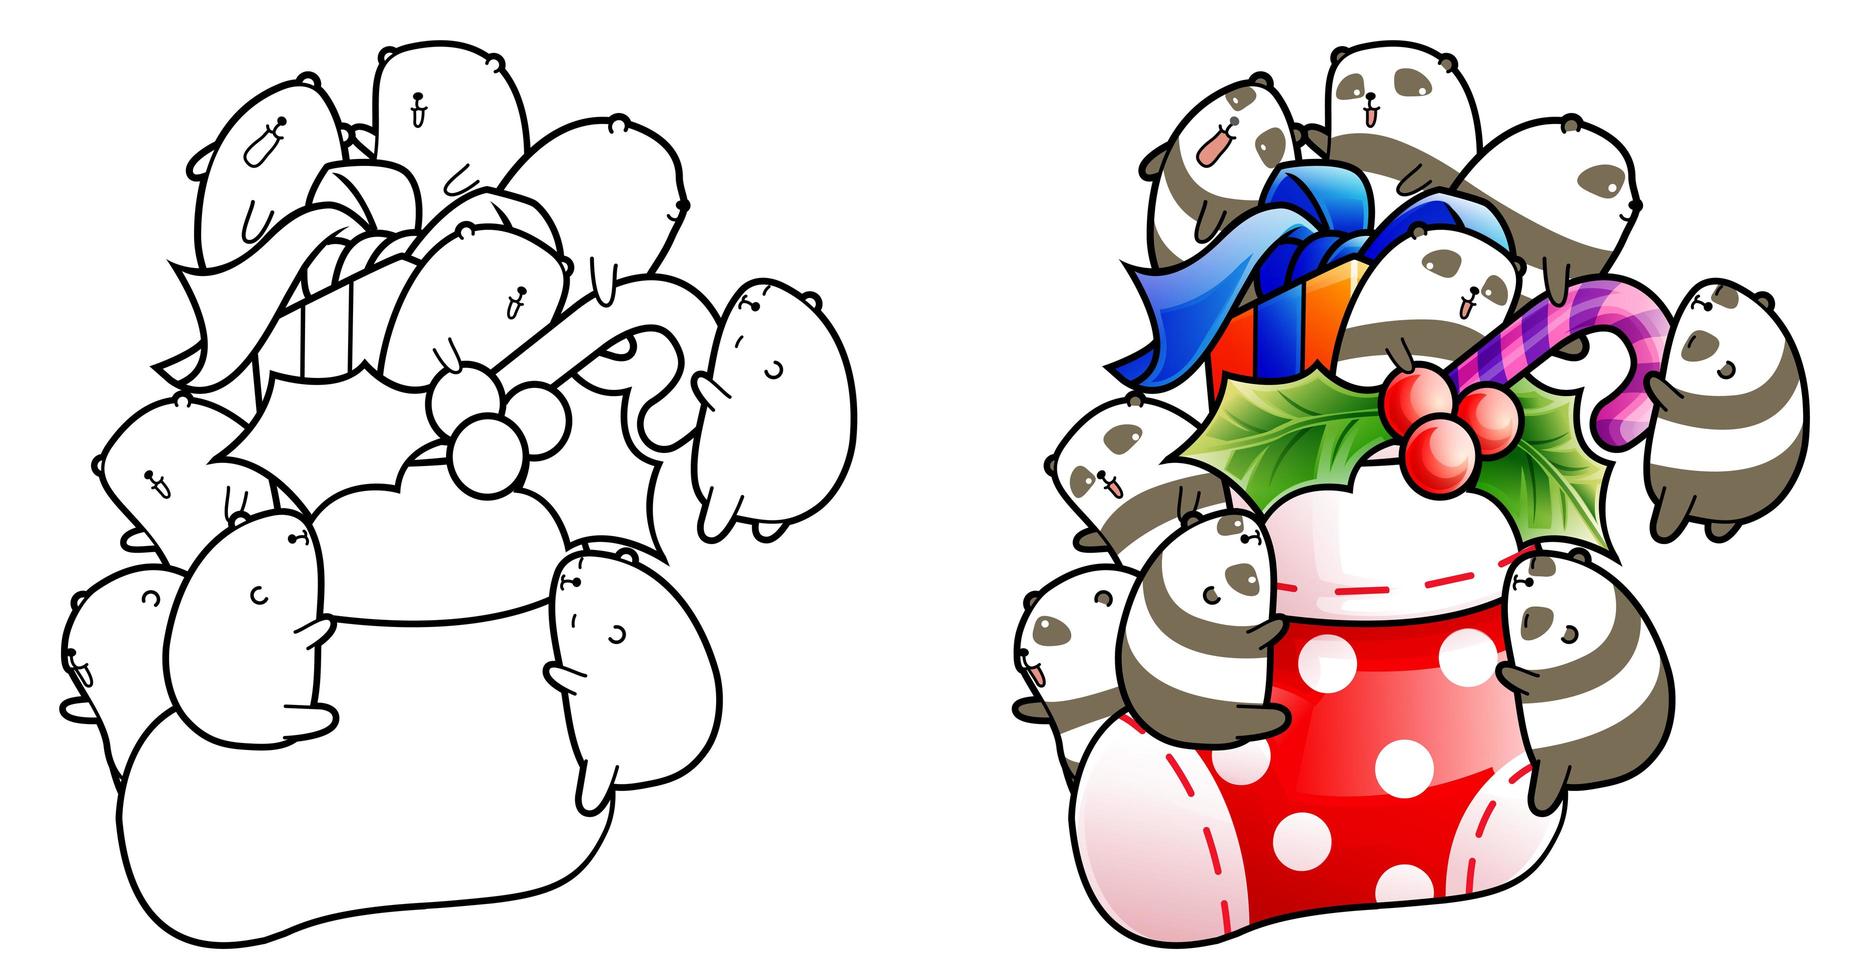 Cute pandas on Christmas day cartoon coloring page vector